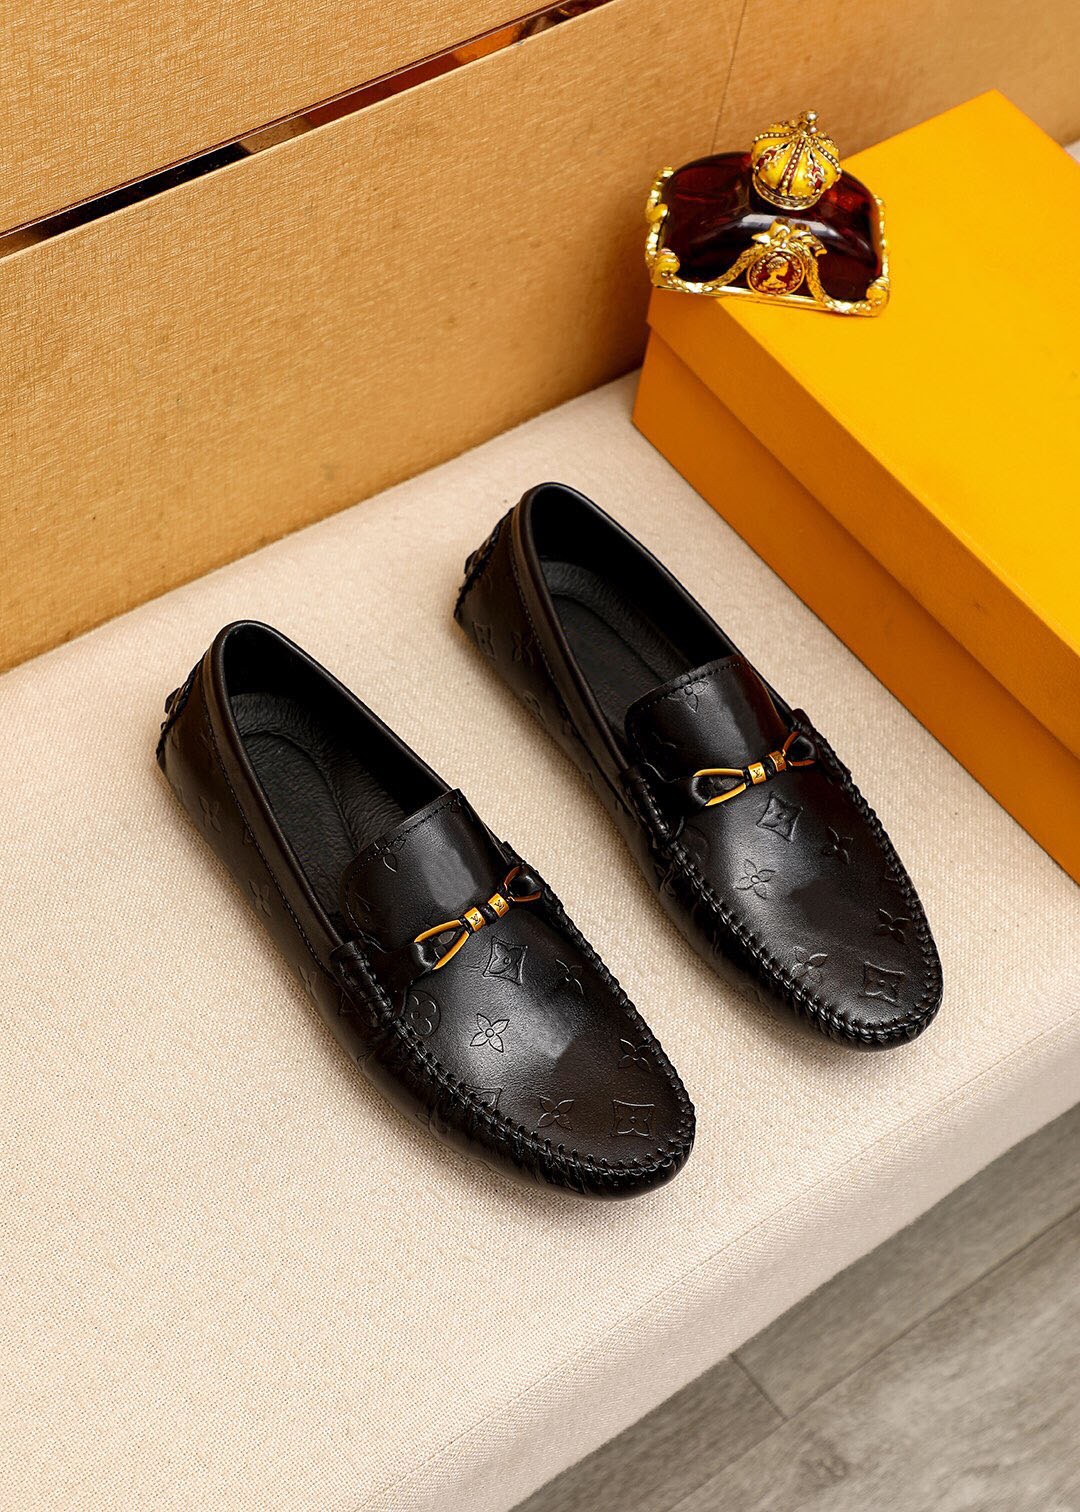 Mens Classic Designer Dress Shoes Casual Business Flats Male Male Manoms Princetown Momes Tamanho 37-47